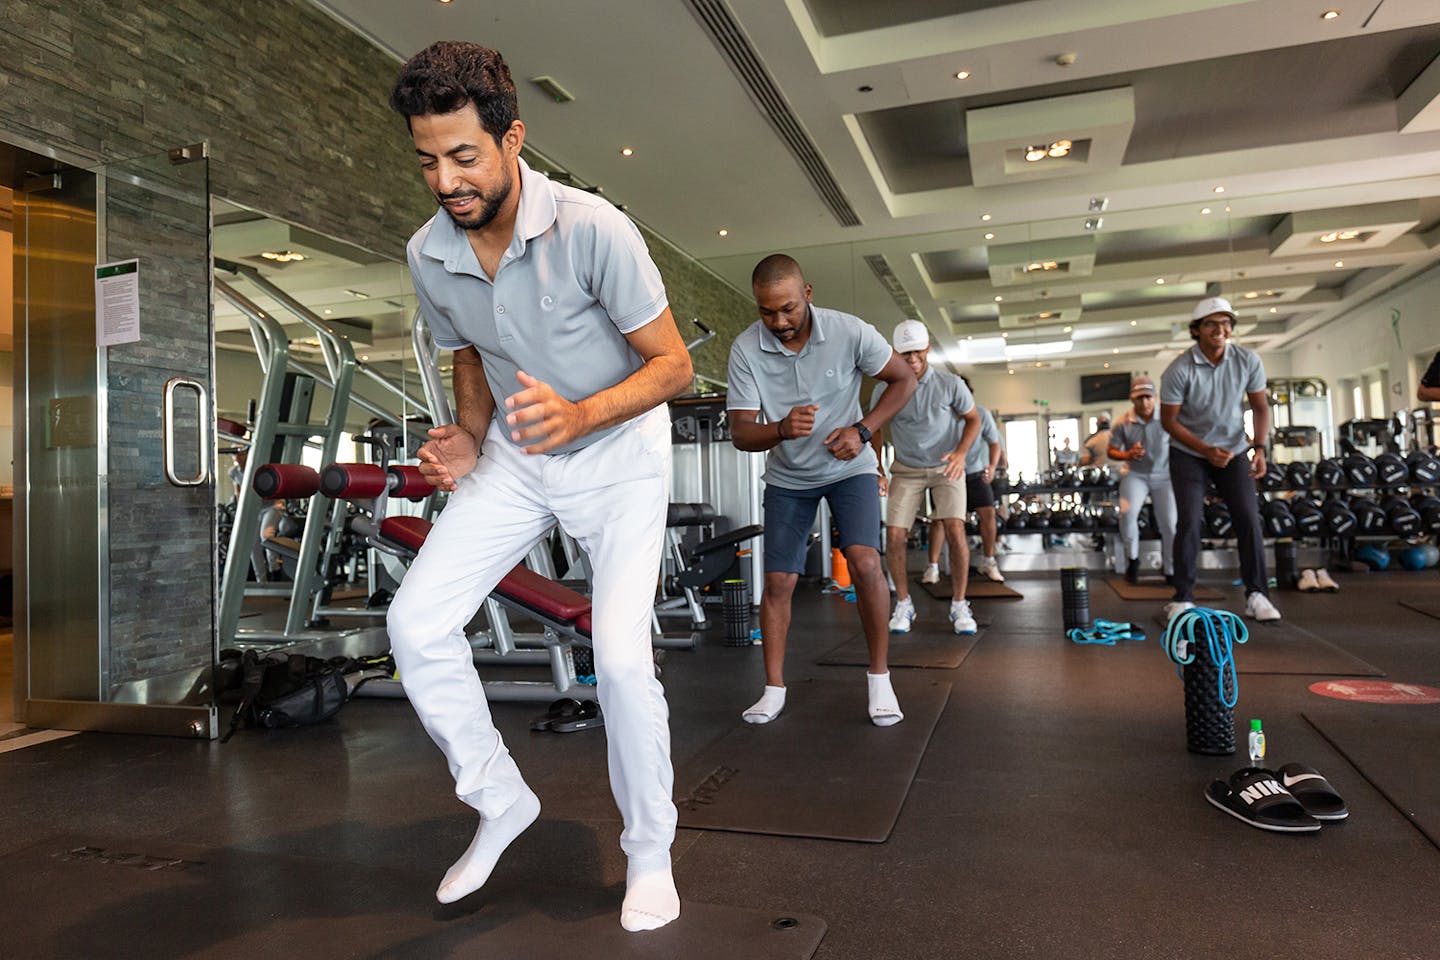 AAC Academy participants work on fitness in Dubai